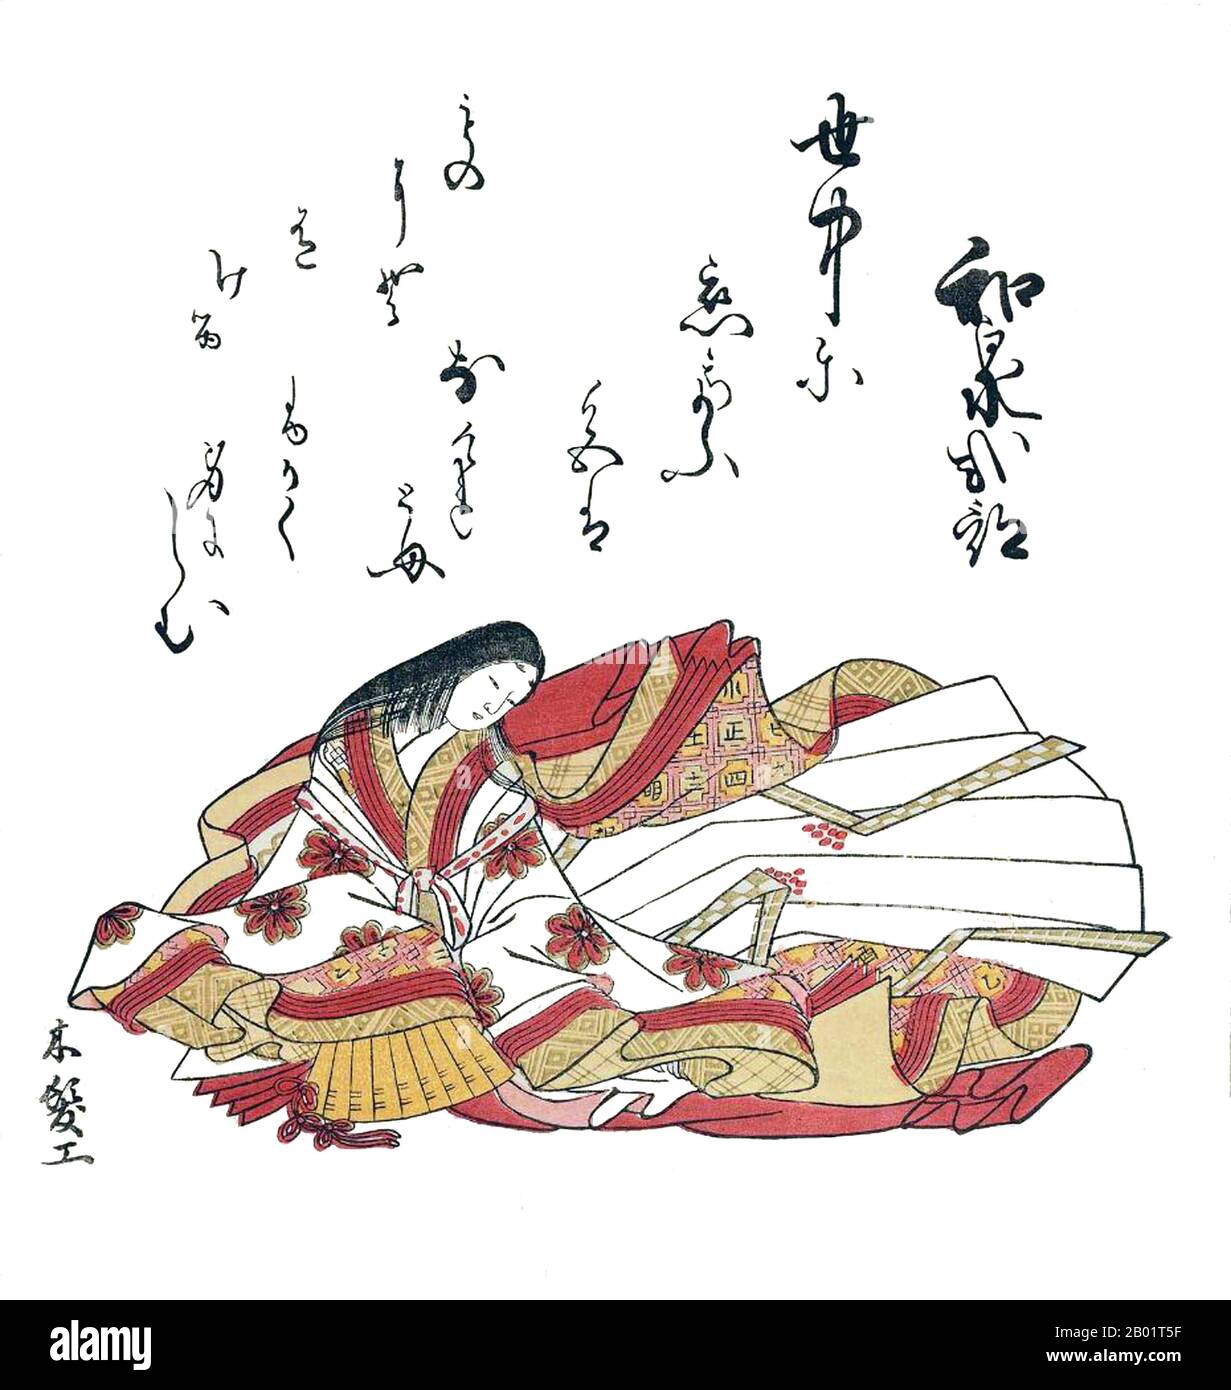 Japan: Lady Izumi Shikibu (c. 973-1025), poet and novelist. Ukiyo-e Woodblock print by Komatsuken Kiyomitsu (fl. 18th century), 1765.  Izumi Shikibu (976-) was a mid Heian period Japanese poet. She is a member of the Thirty-six Medieval Poetry Immortals (chūko sanjurokkasen). She was the contemporary of Murasaki Shikibu, and Akazome Emon at the court of Joto Mon'in. She 'is considered by many to have been the greatest woman poet of the Heian period'. Her legacy includes 242 poems and two kashu. Stock Photo